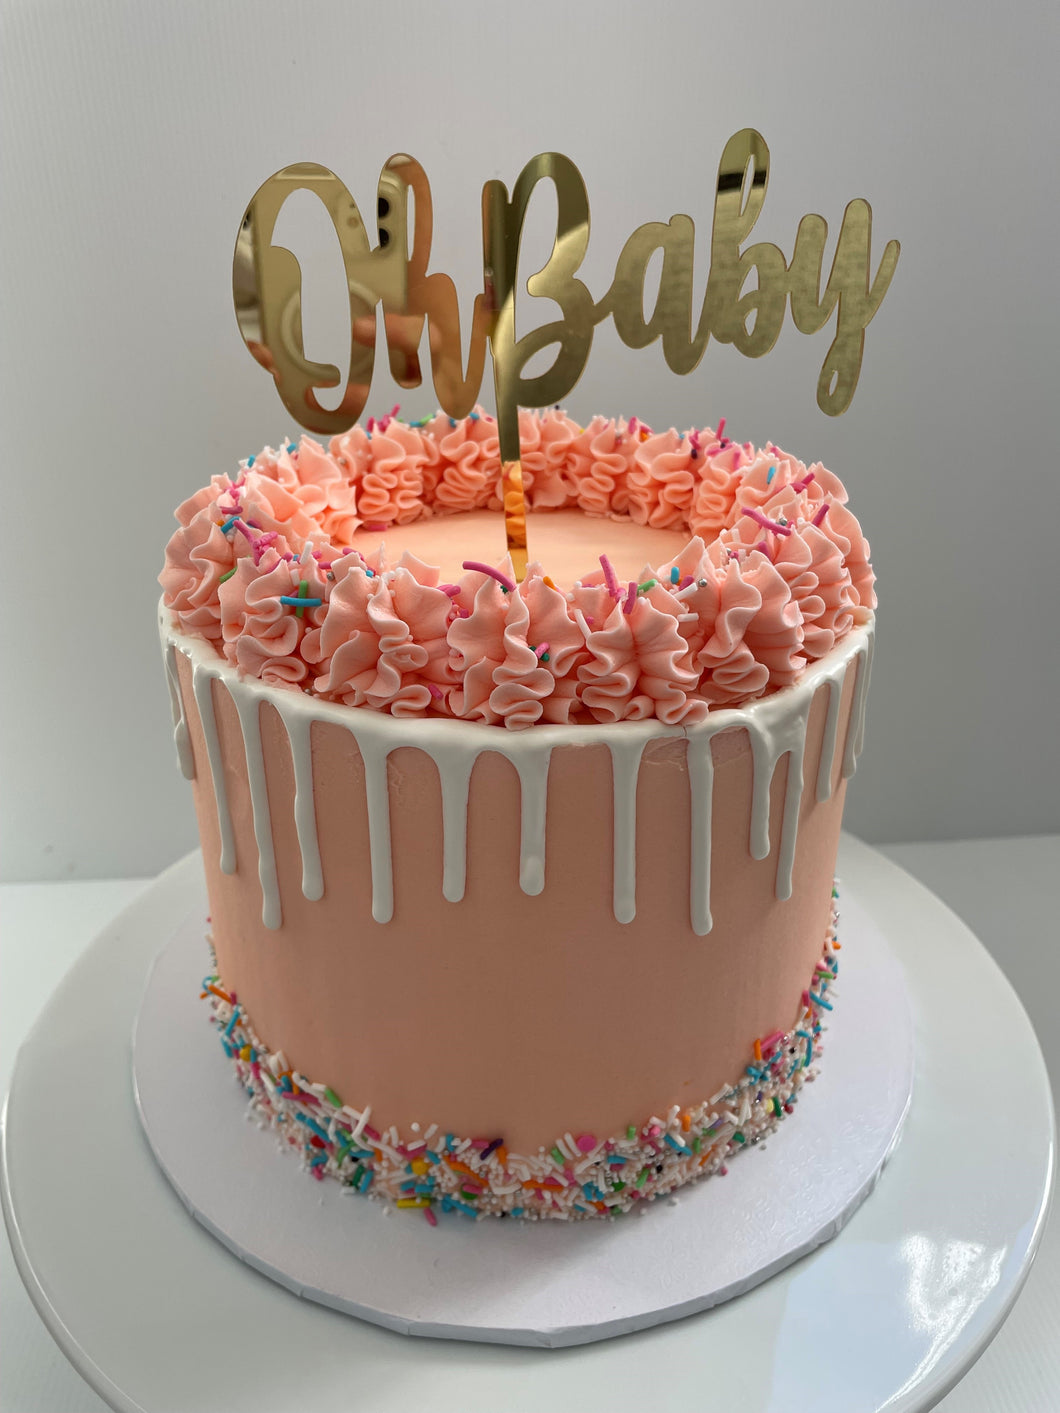 OH Baby cake - Comes with topper